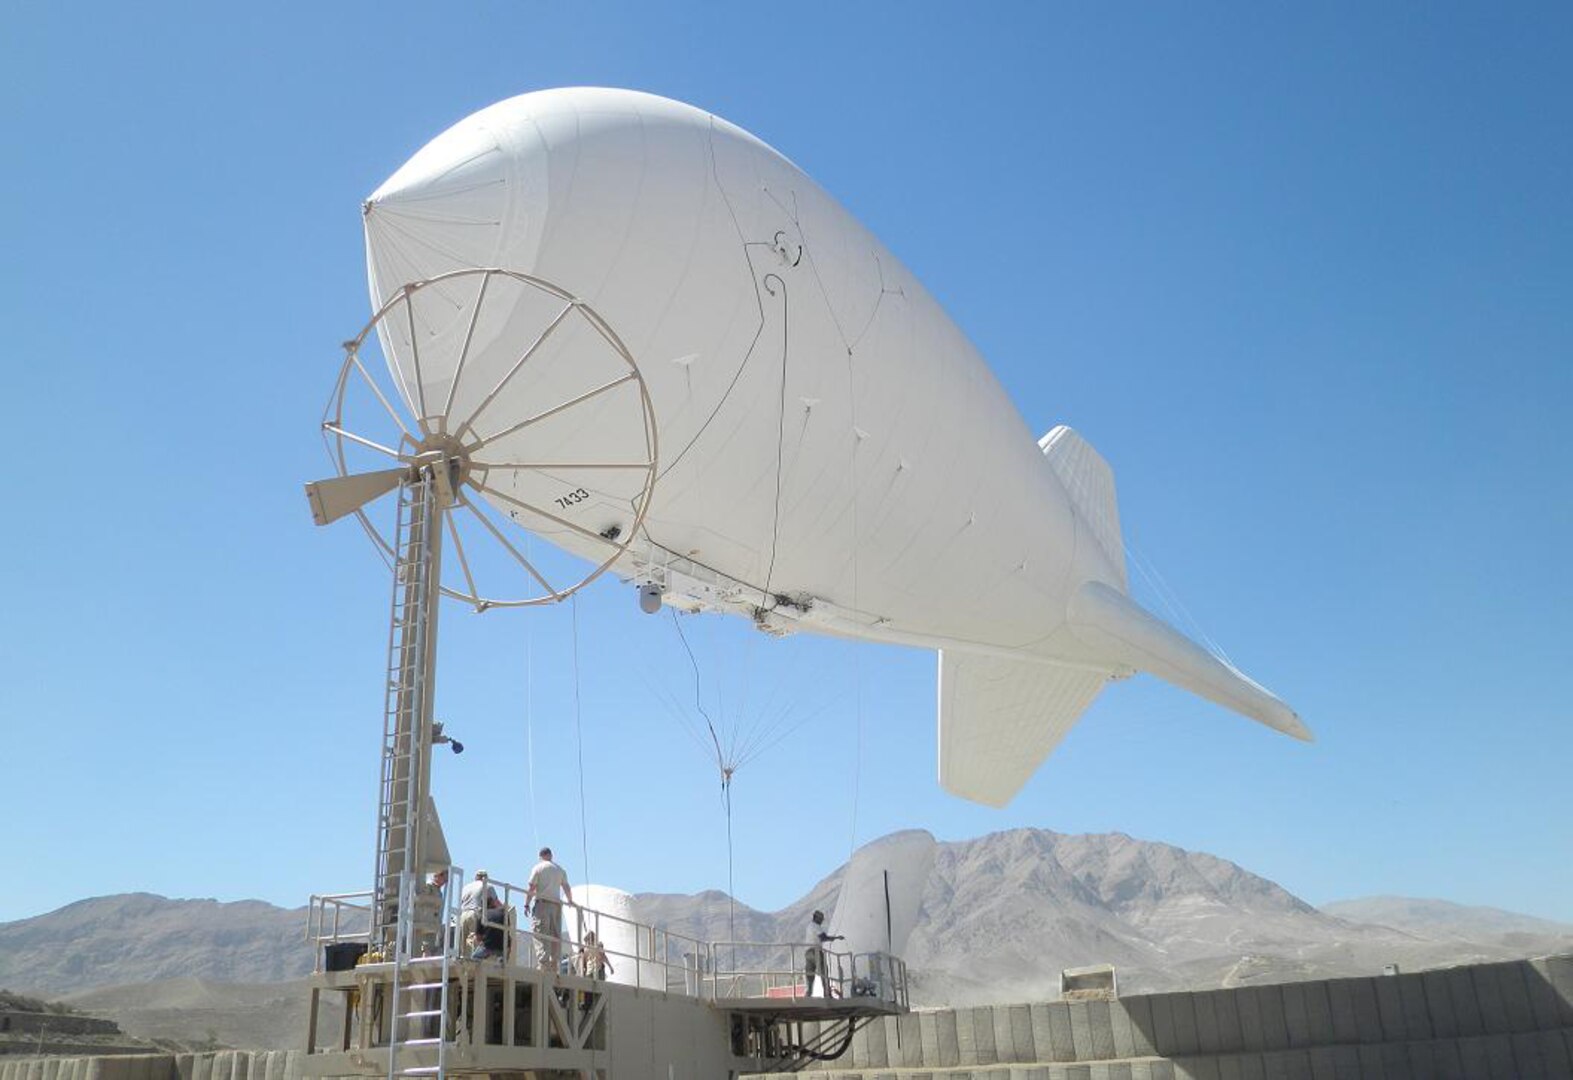 A new Persistent Surveillance System (PSS) begins its assent above Camp Julien Sept. 14, 2010, to provide the Afghan National Security Forces and International Security Assistance Force officials with an extra level of surveillance capability for security operations around Kabul, Afghanistan. The PSS, a floating aerostat (or blimp), has high-tech camera equipment able to provide 360 degree views of the city.